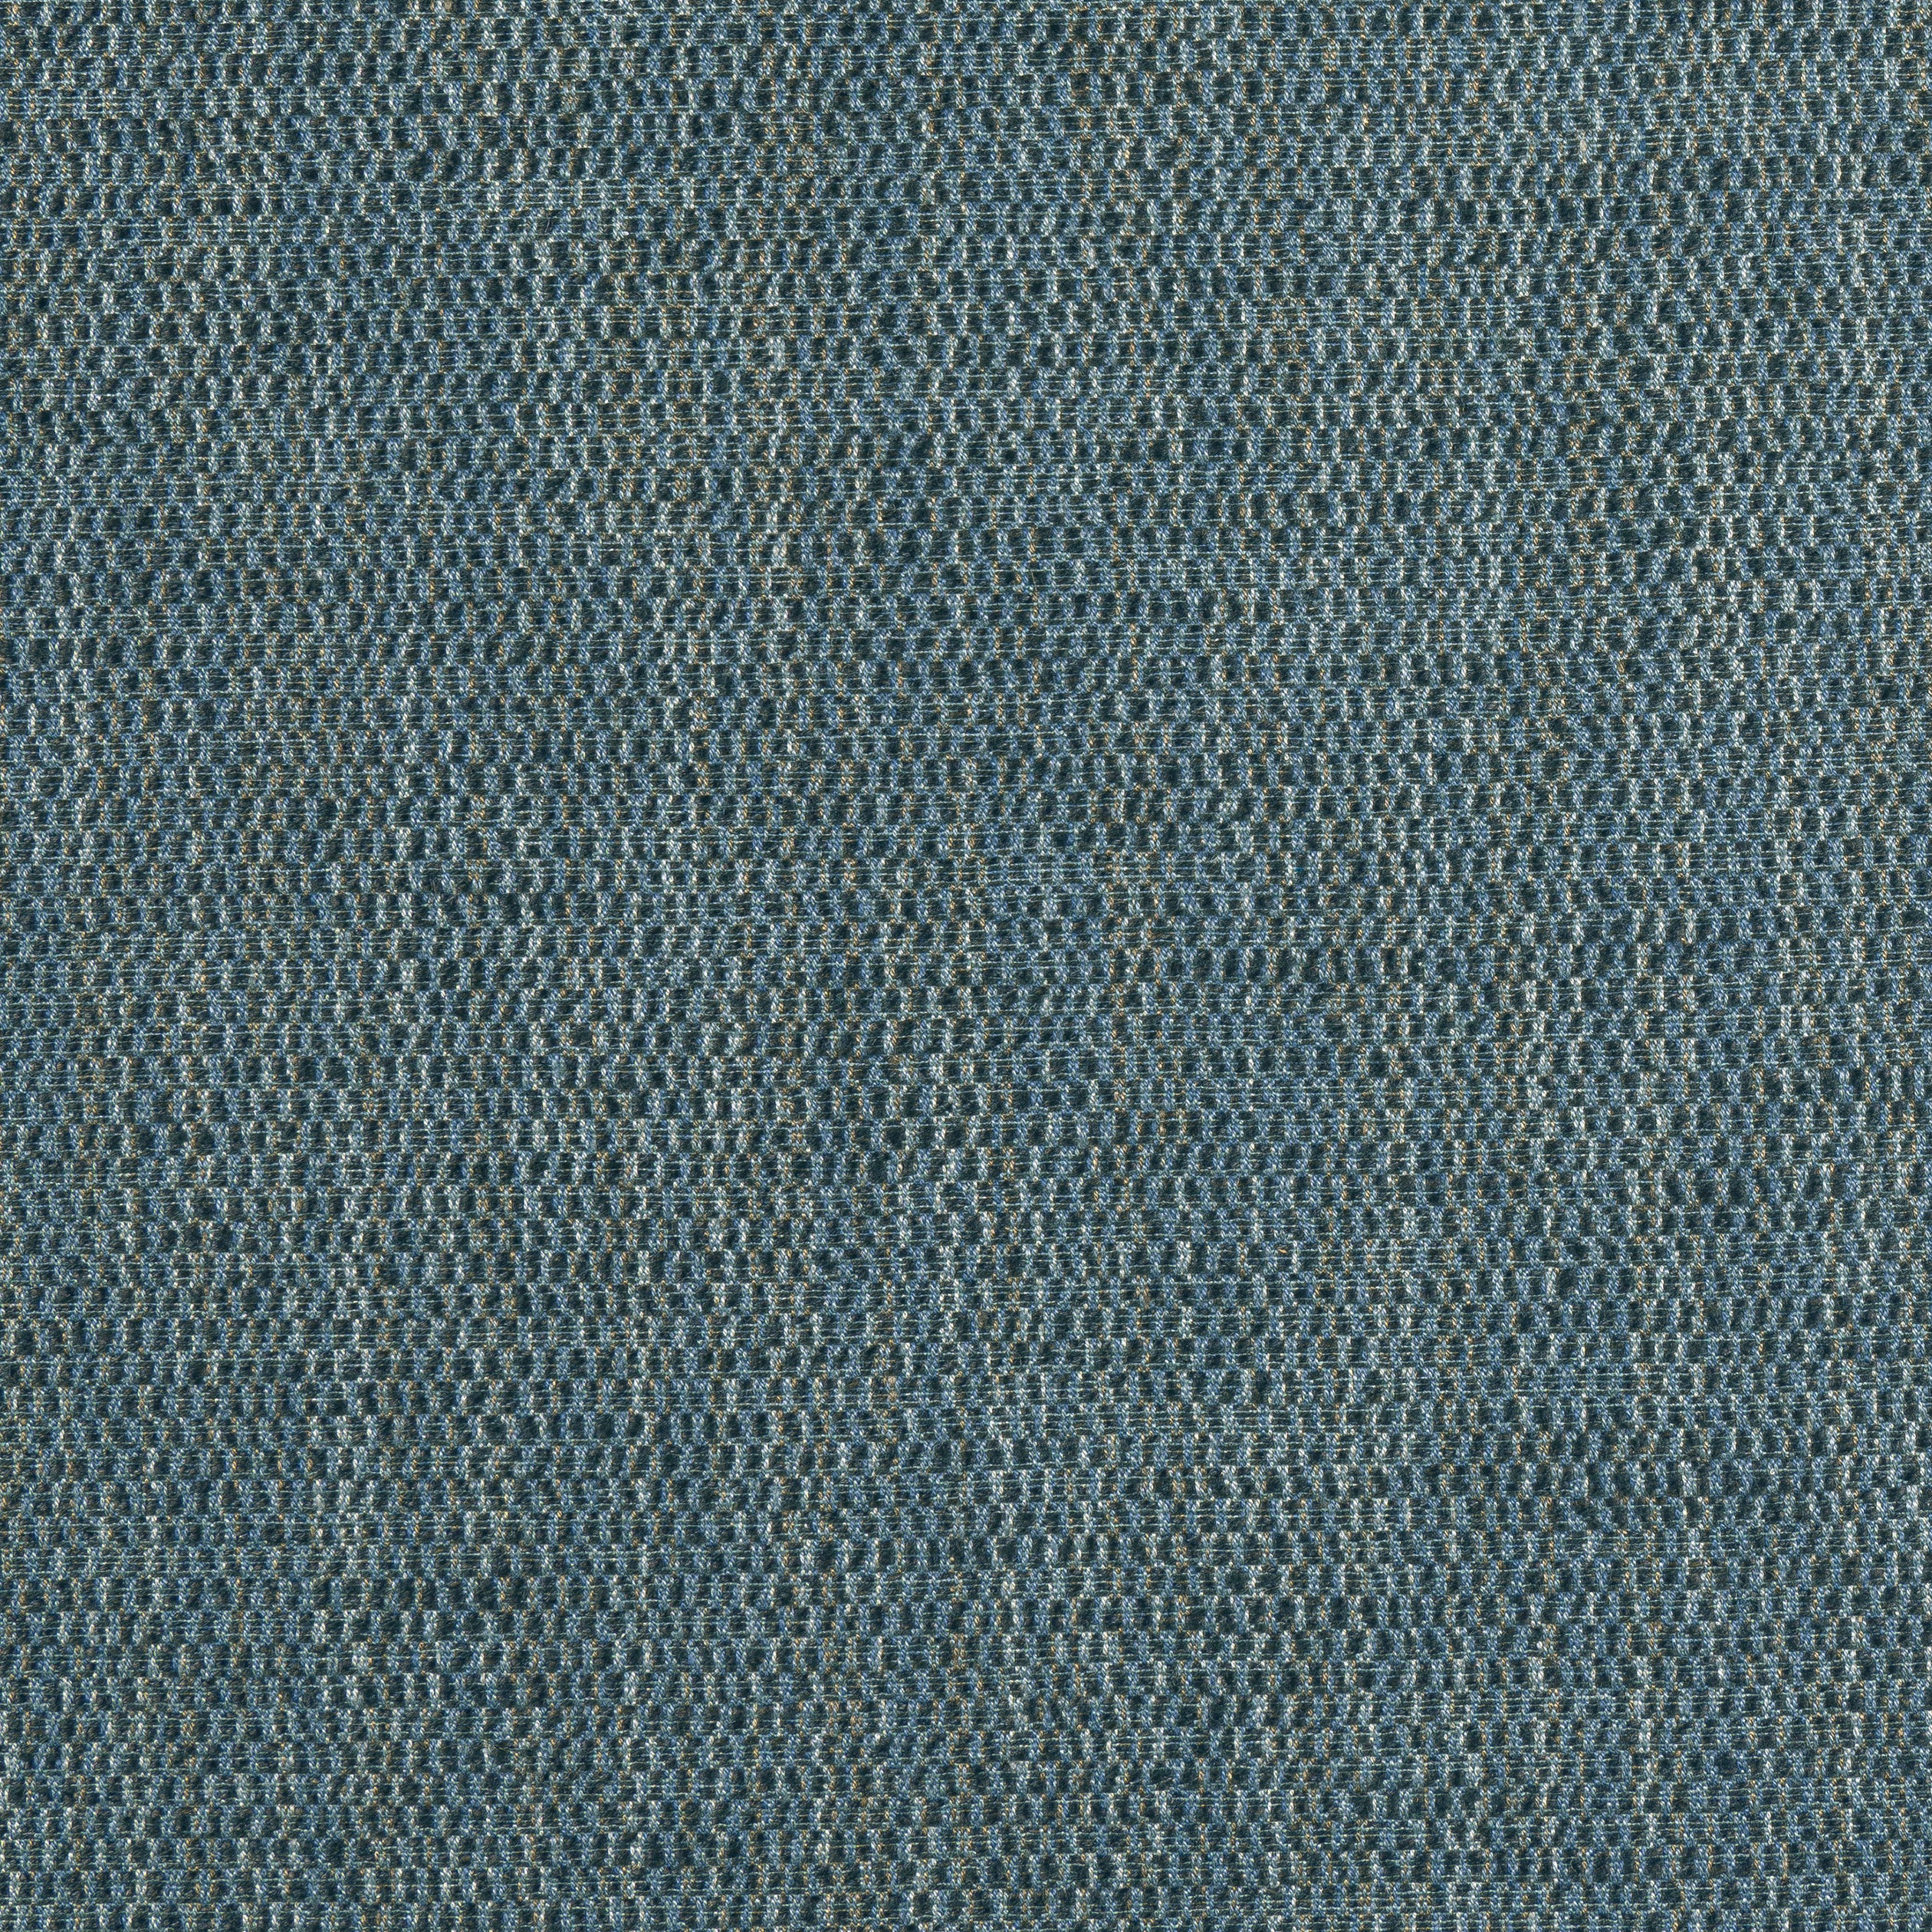 Rito fabric in mineral color - pattern number W8119 - by Thibaut in the Sereno collection